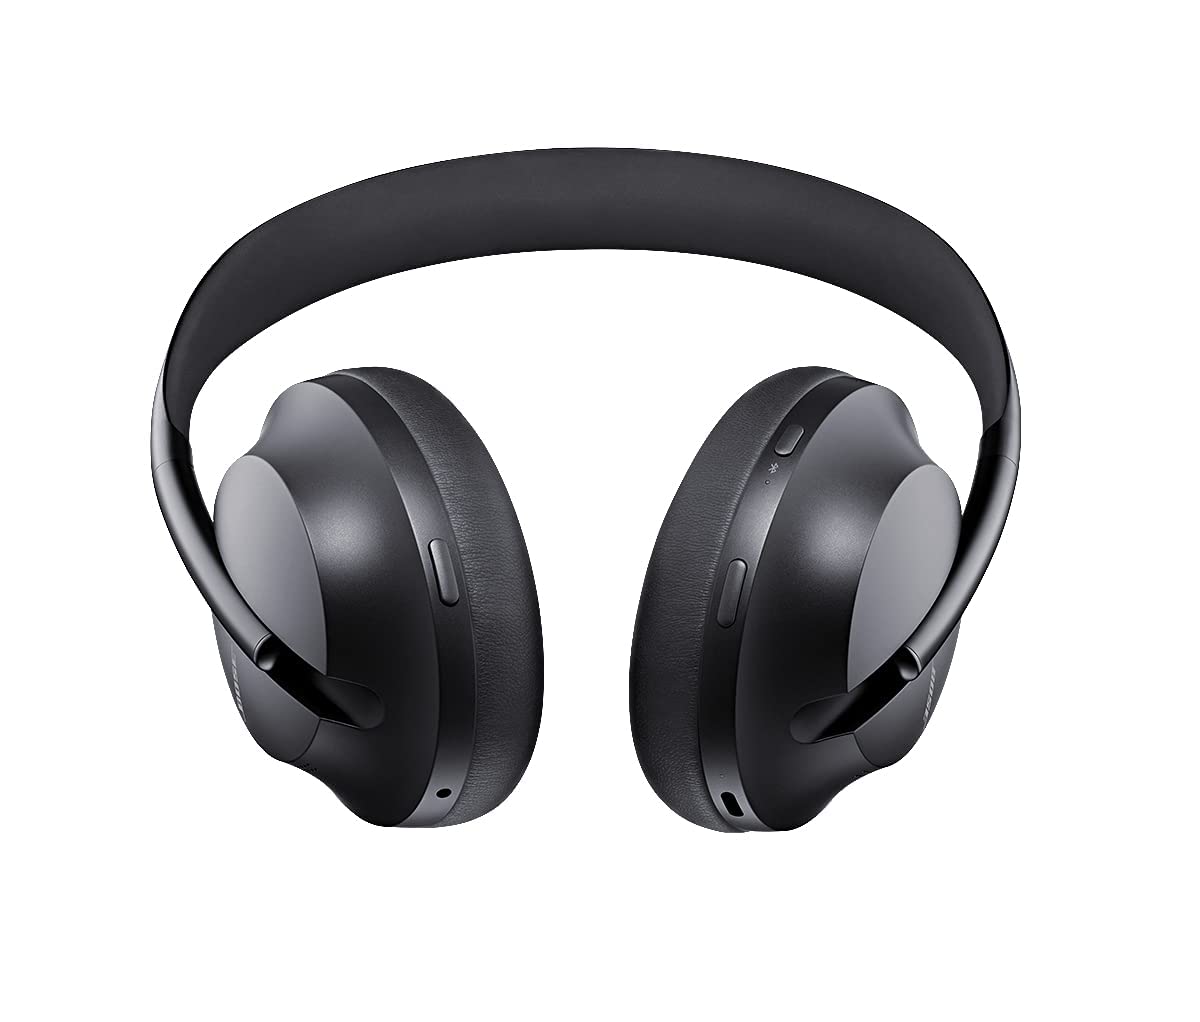 Bose Noise Cancelling Headphones 700,Bluetooth, Over-Ear Wireless with